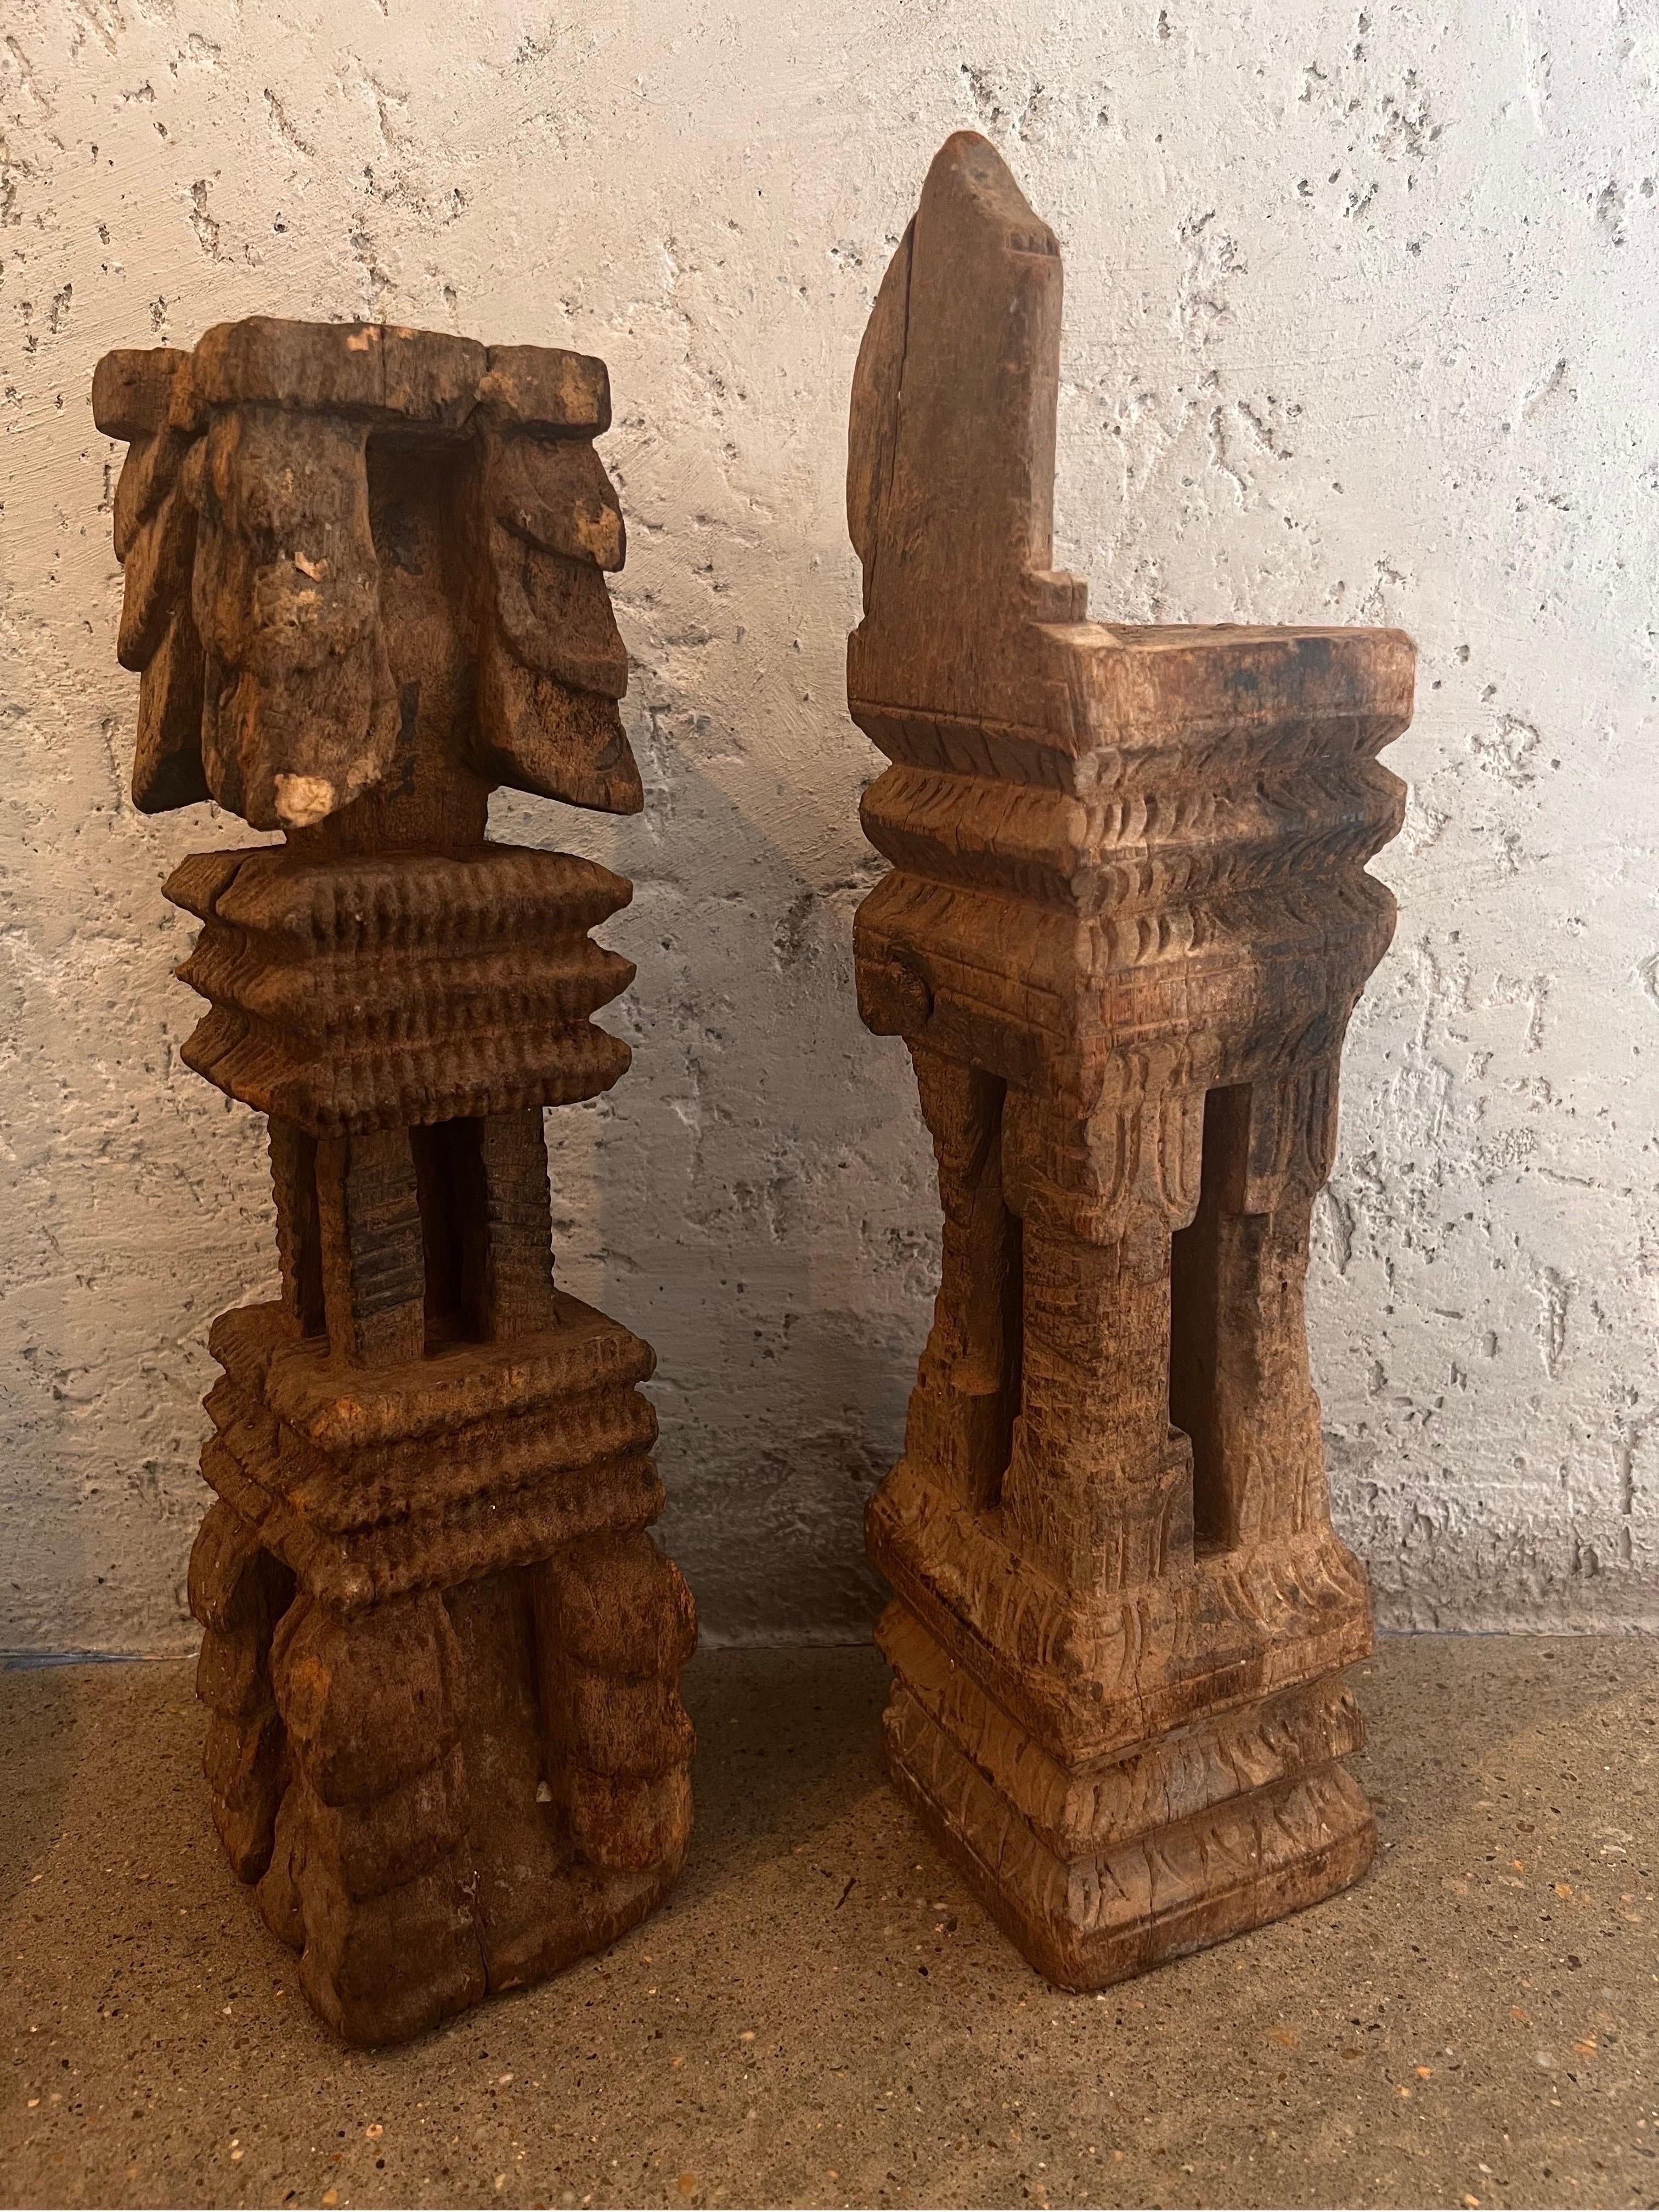 The beautifully carved wooden artifacts make for wonderful modern day candlesticks. Each uniquely carved with motifs of their origin.